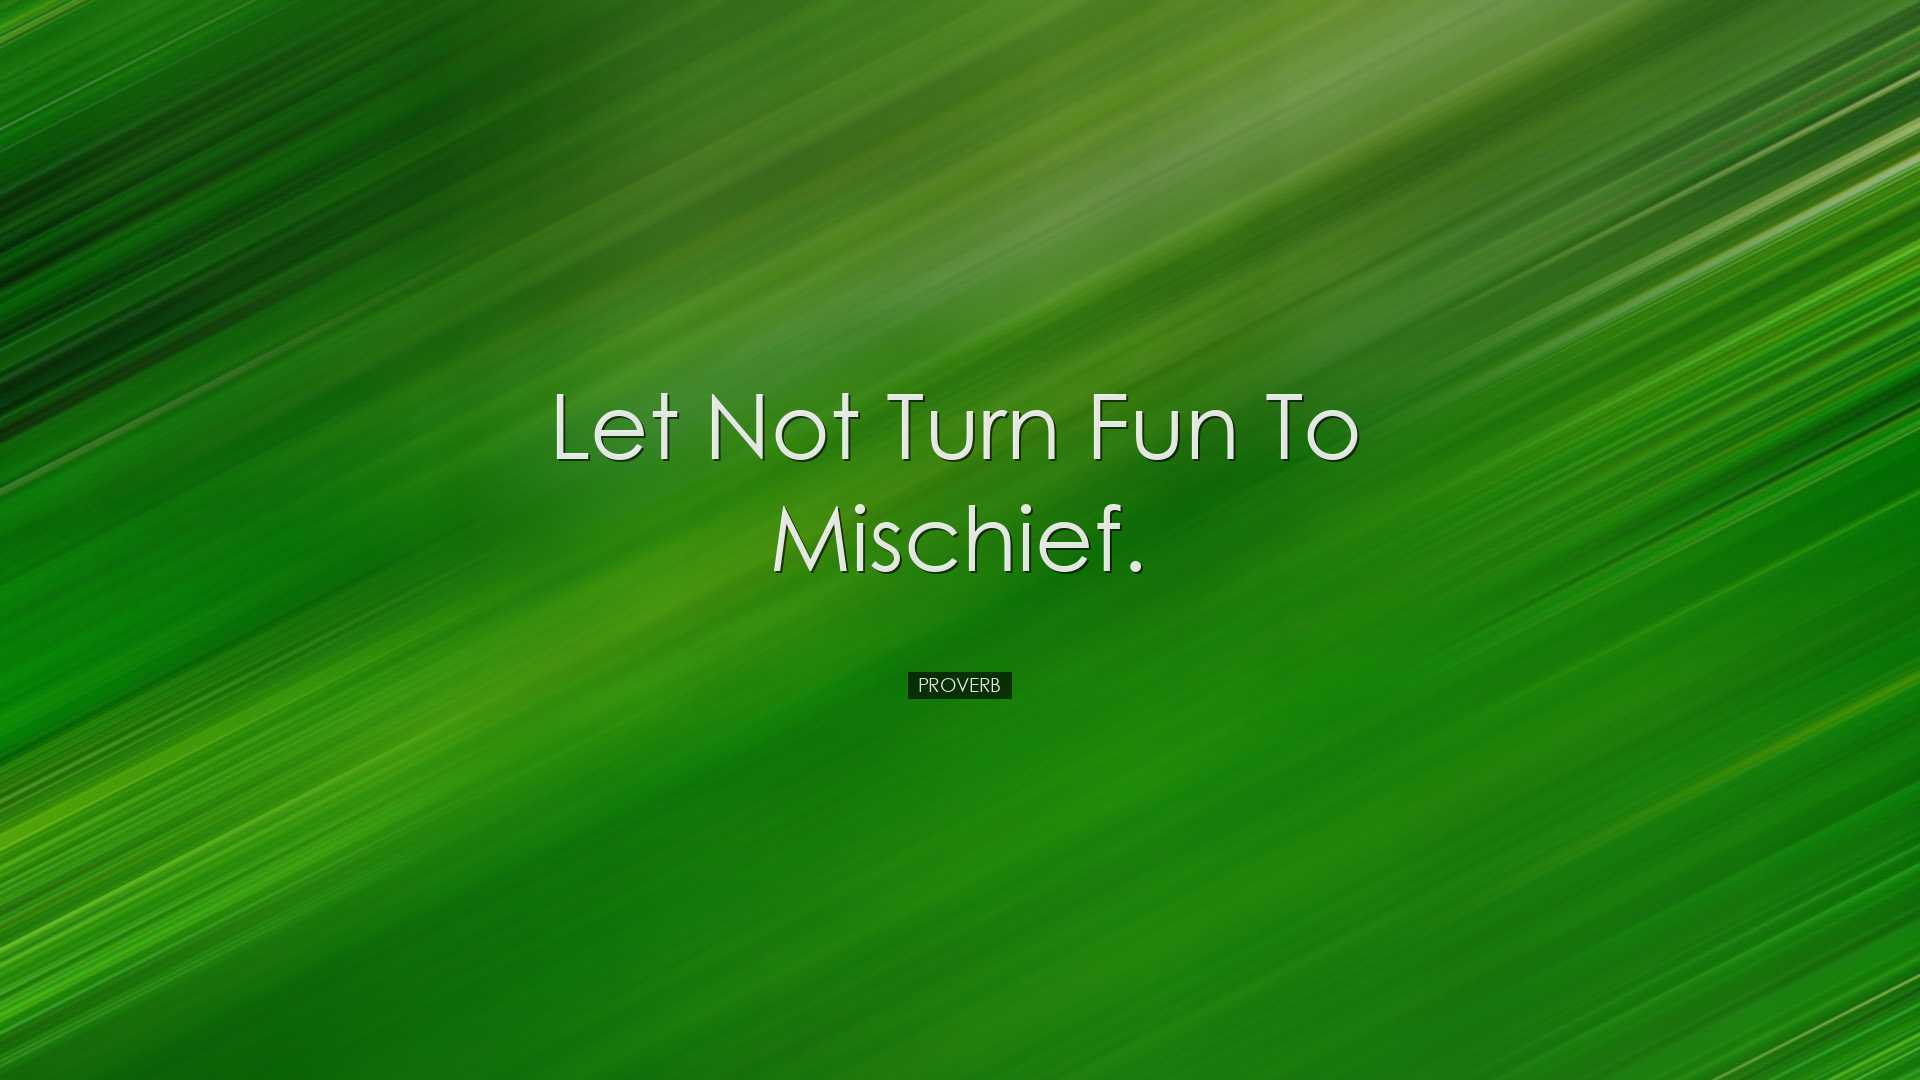 Let not turn fun to mischief. - Proverb